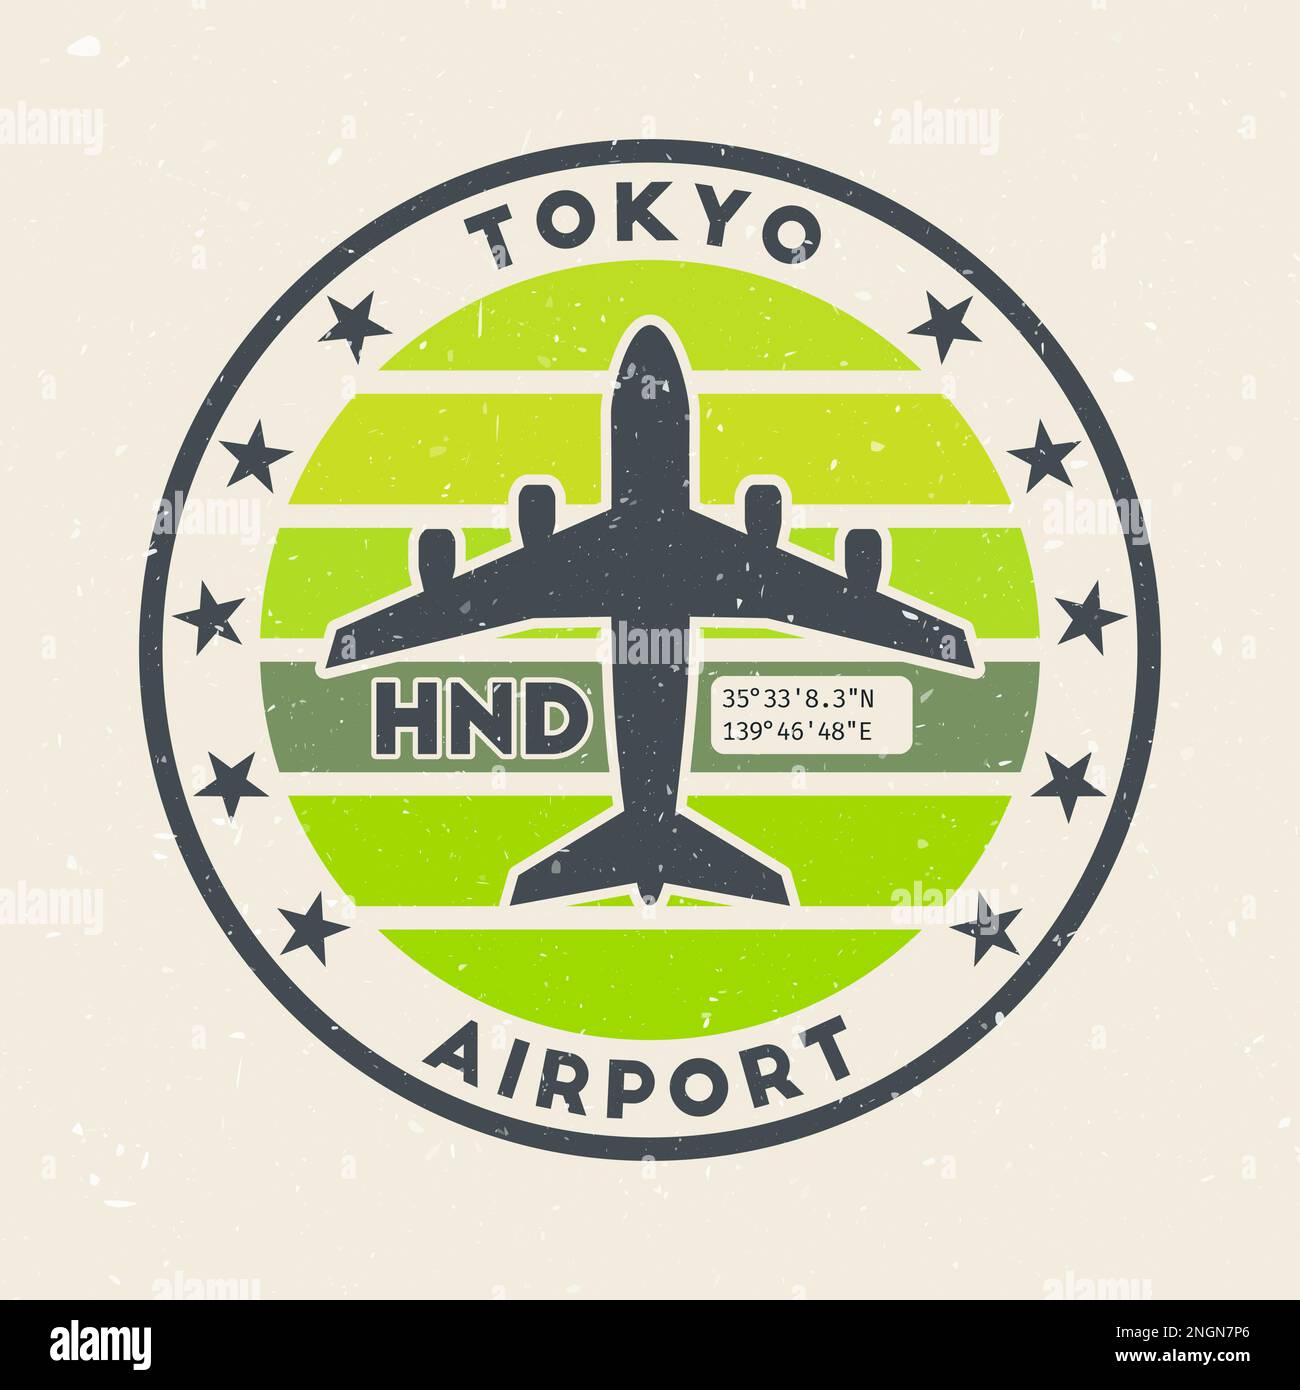 Tokyo airport insignia. Round badge with vintage stripes, airplane shape, airport IATA code and GPS coordinates. Appealing vector illustration. Stock Vector